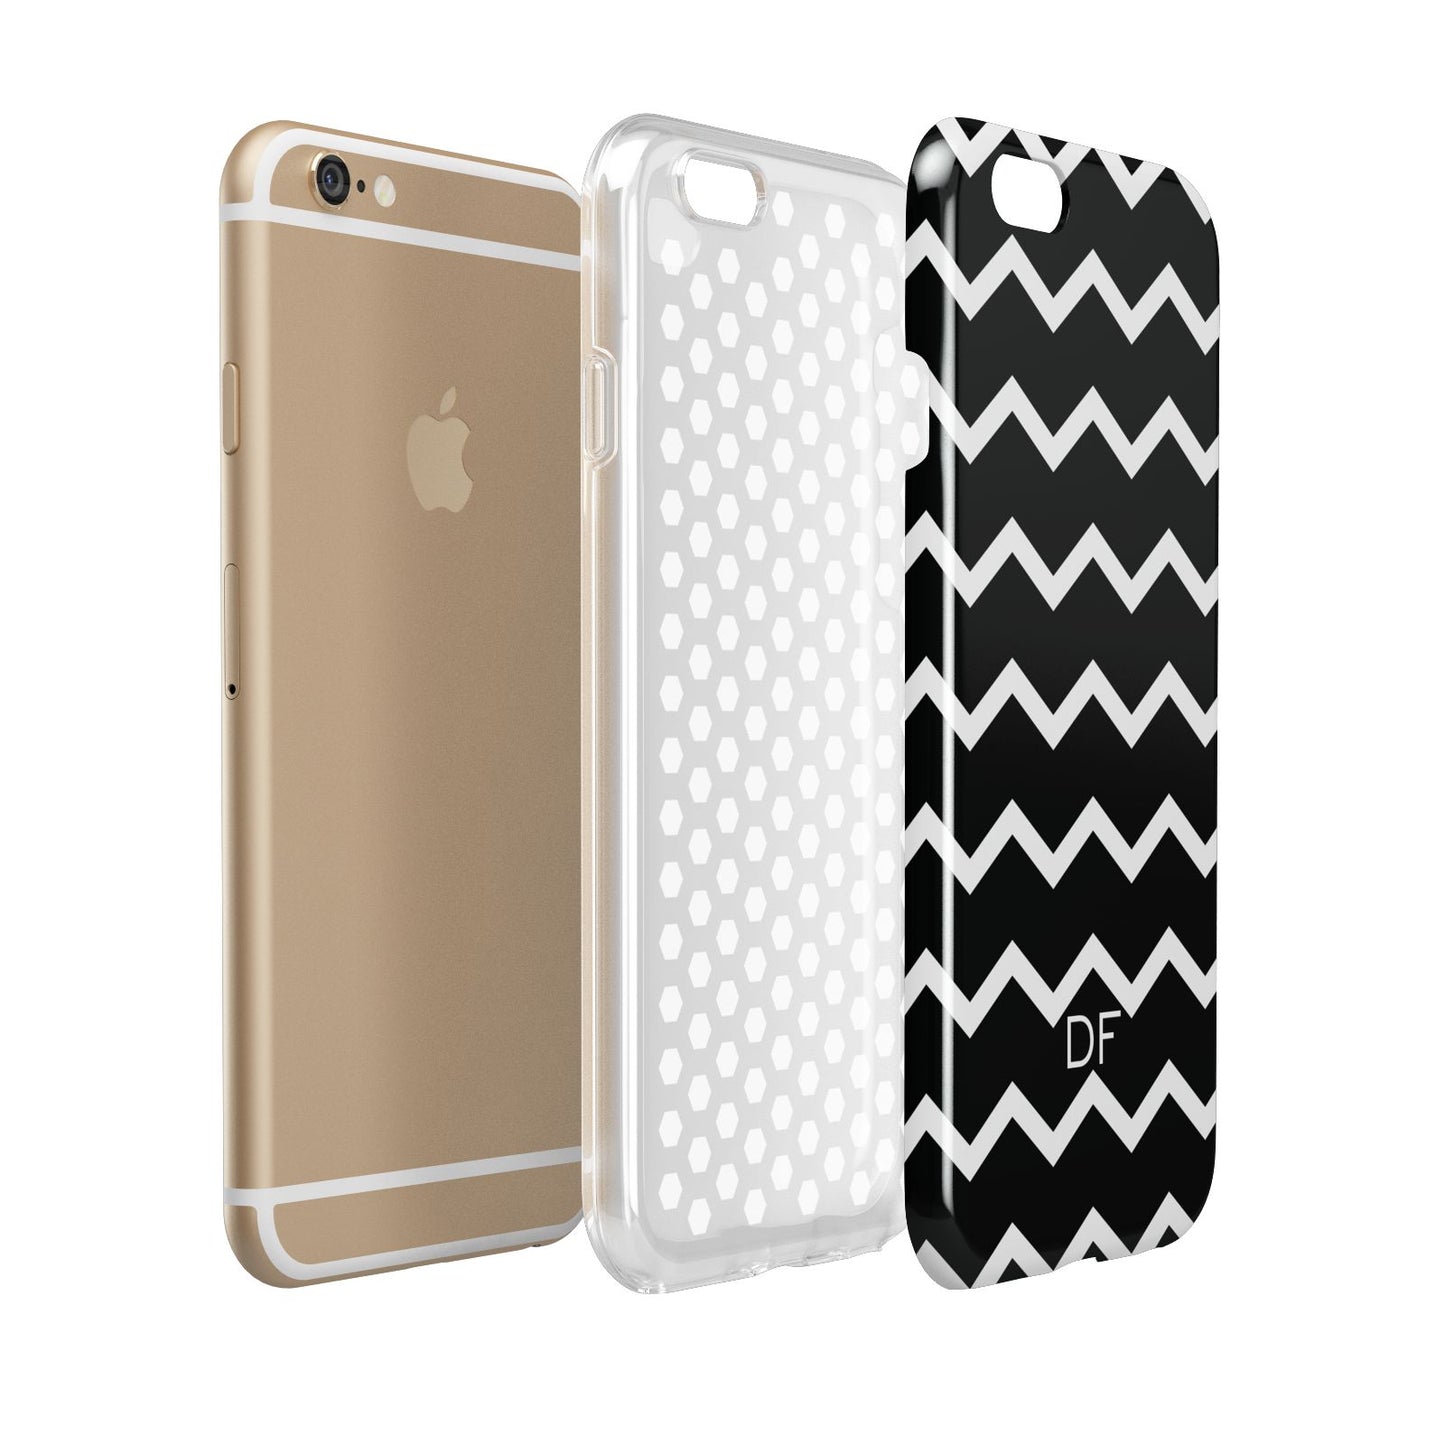 Personalised Chevron Black Apple iPhone 6 3D Tough Case Expanded view